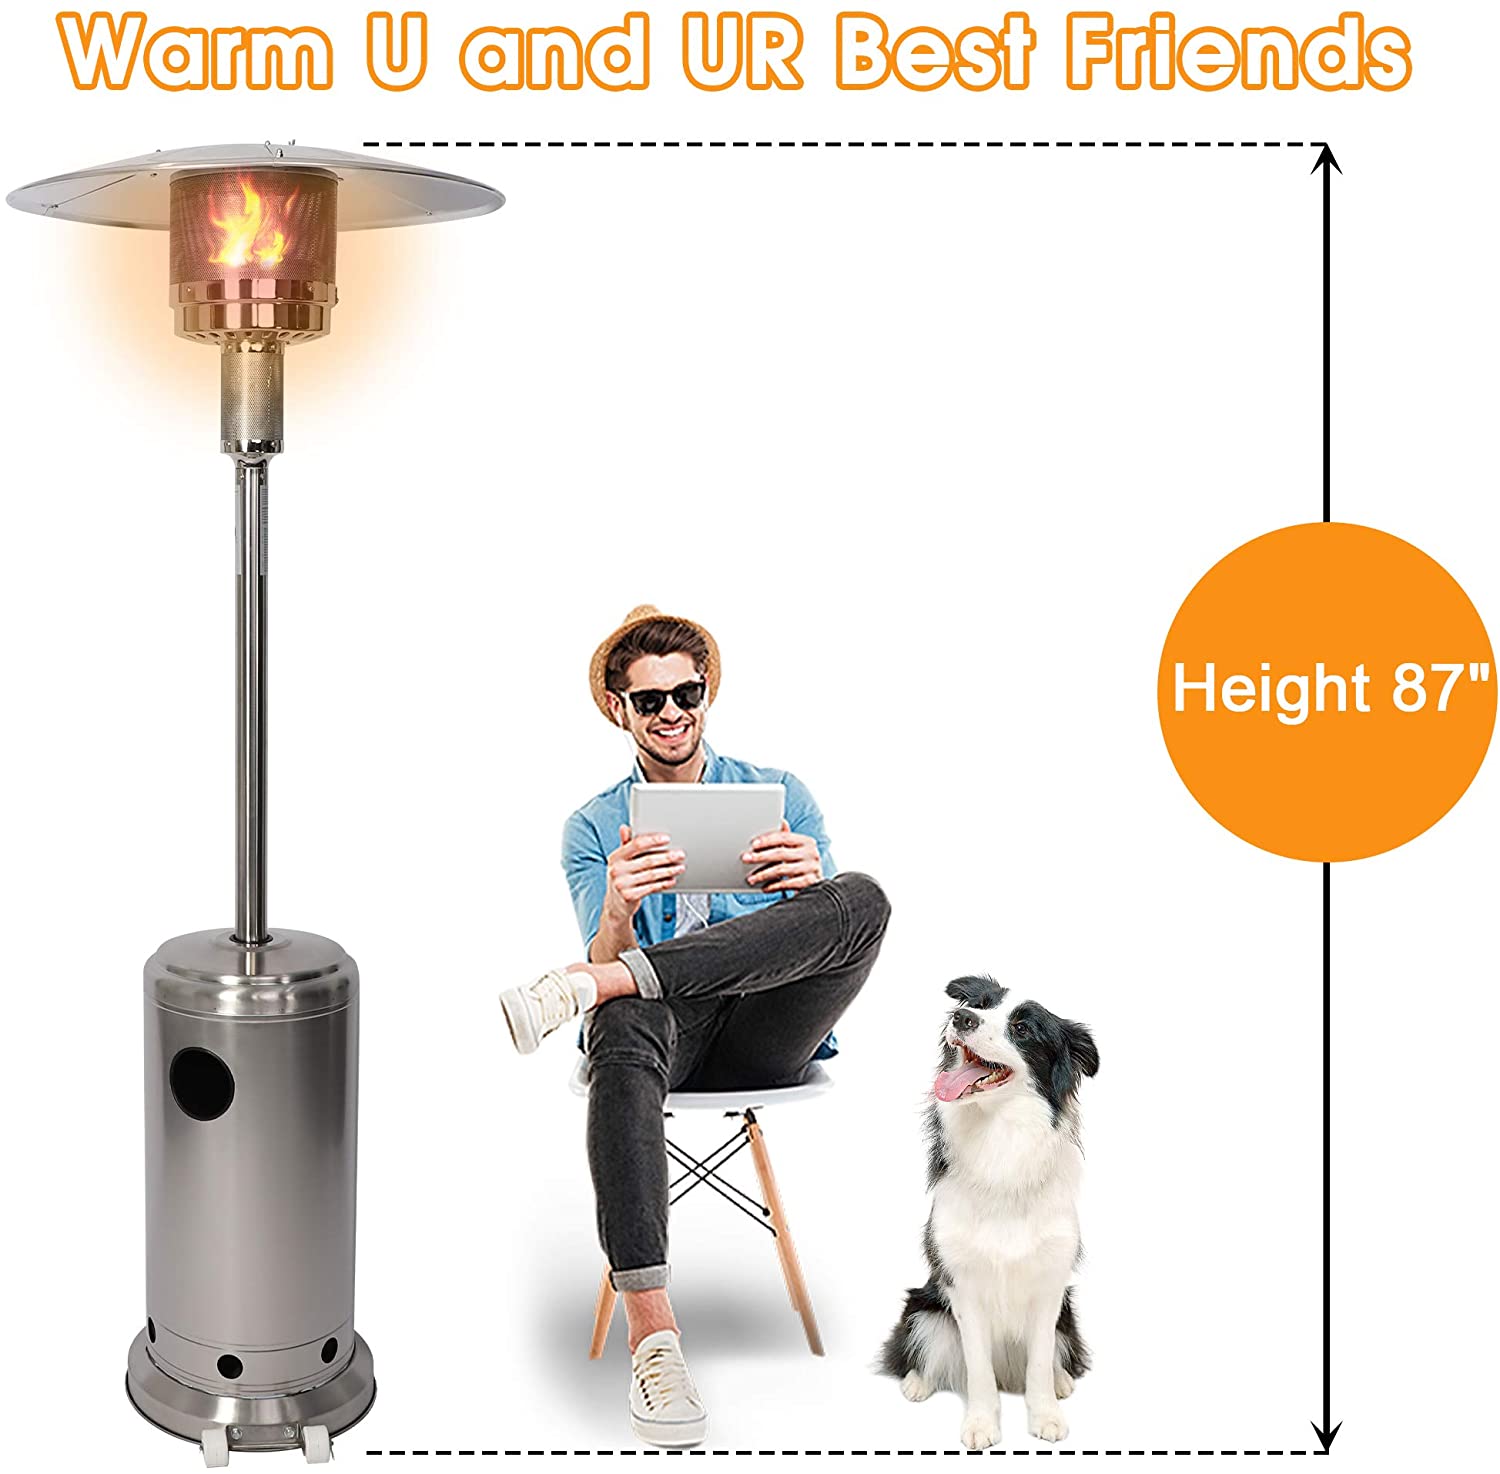 Stainless Steel Patio Heater Propane Outdoor Heater with Anti Tilt Switch, 87” High Quick Space Warm Up with Simple Ignition System Power Heater with Wheels, ETL Certified